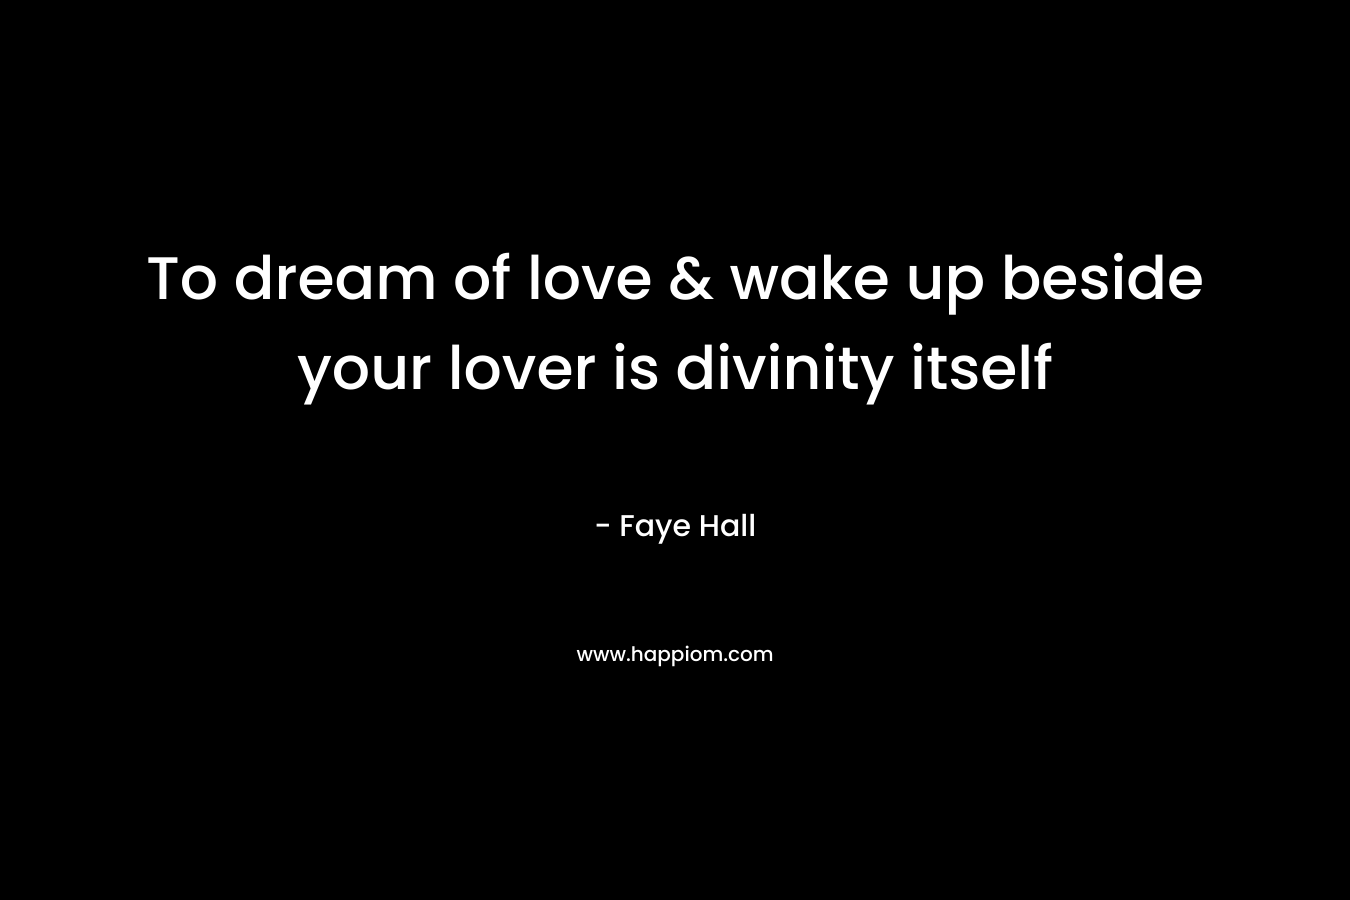 To dream of love & wake up beside your lover is divinity itself – Faye Hall